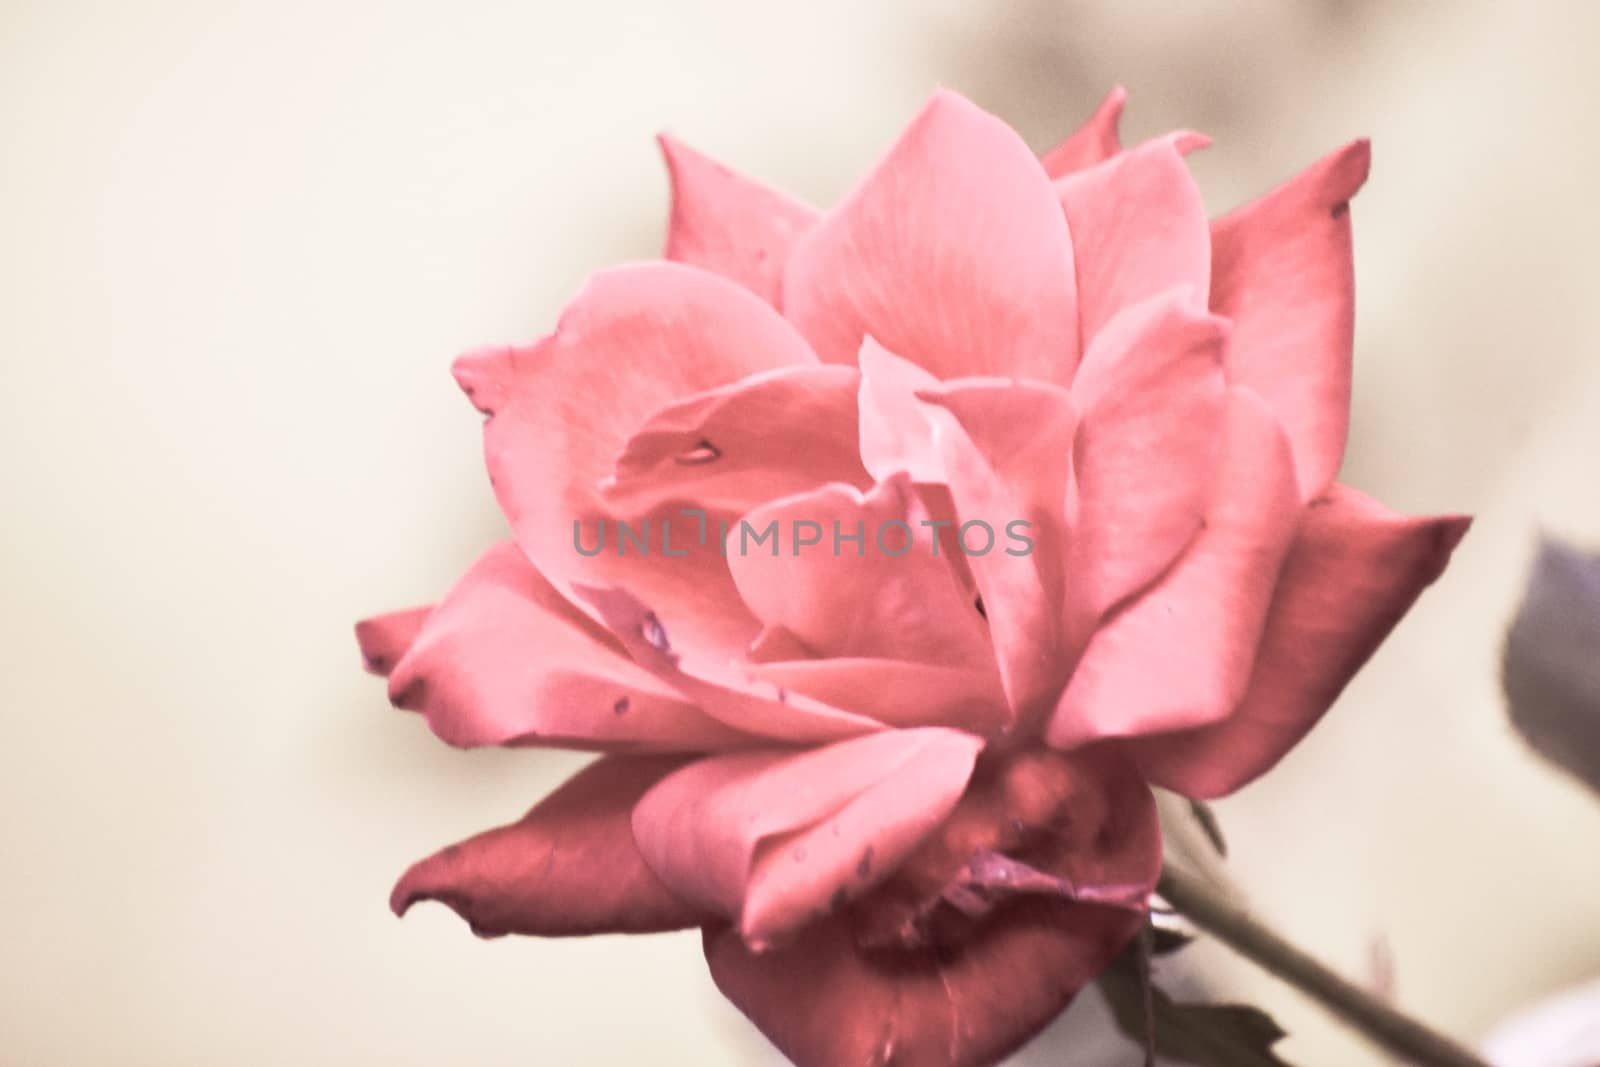 A Bright Pink Rose on a Grey Background by bju12290